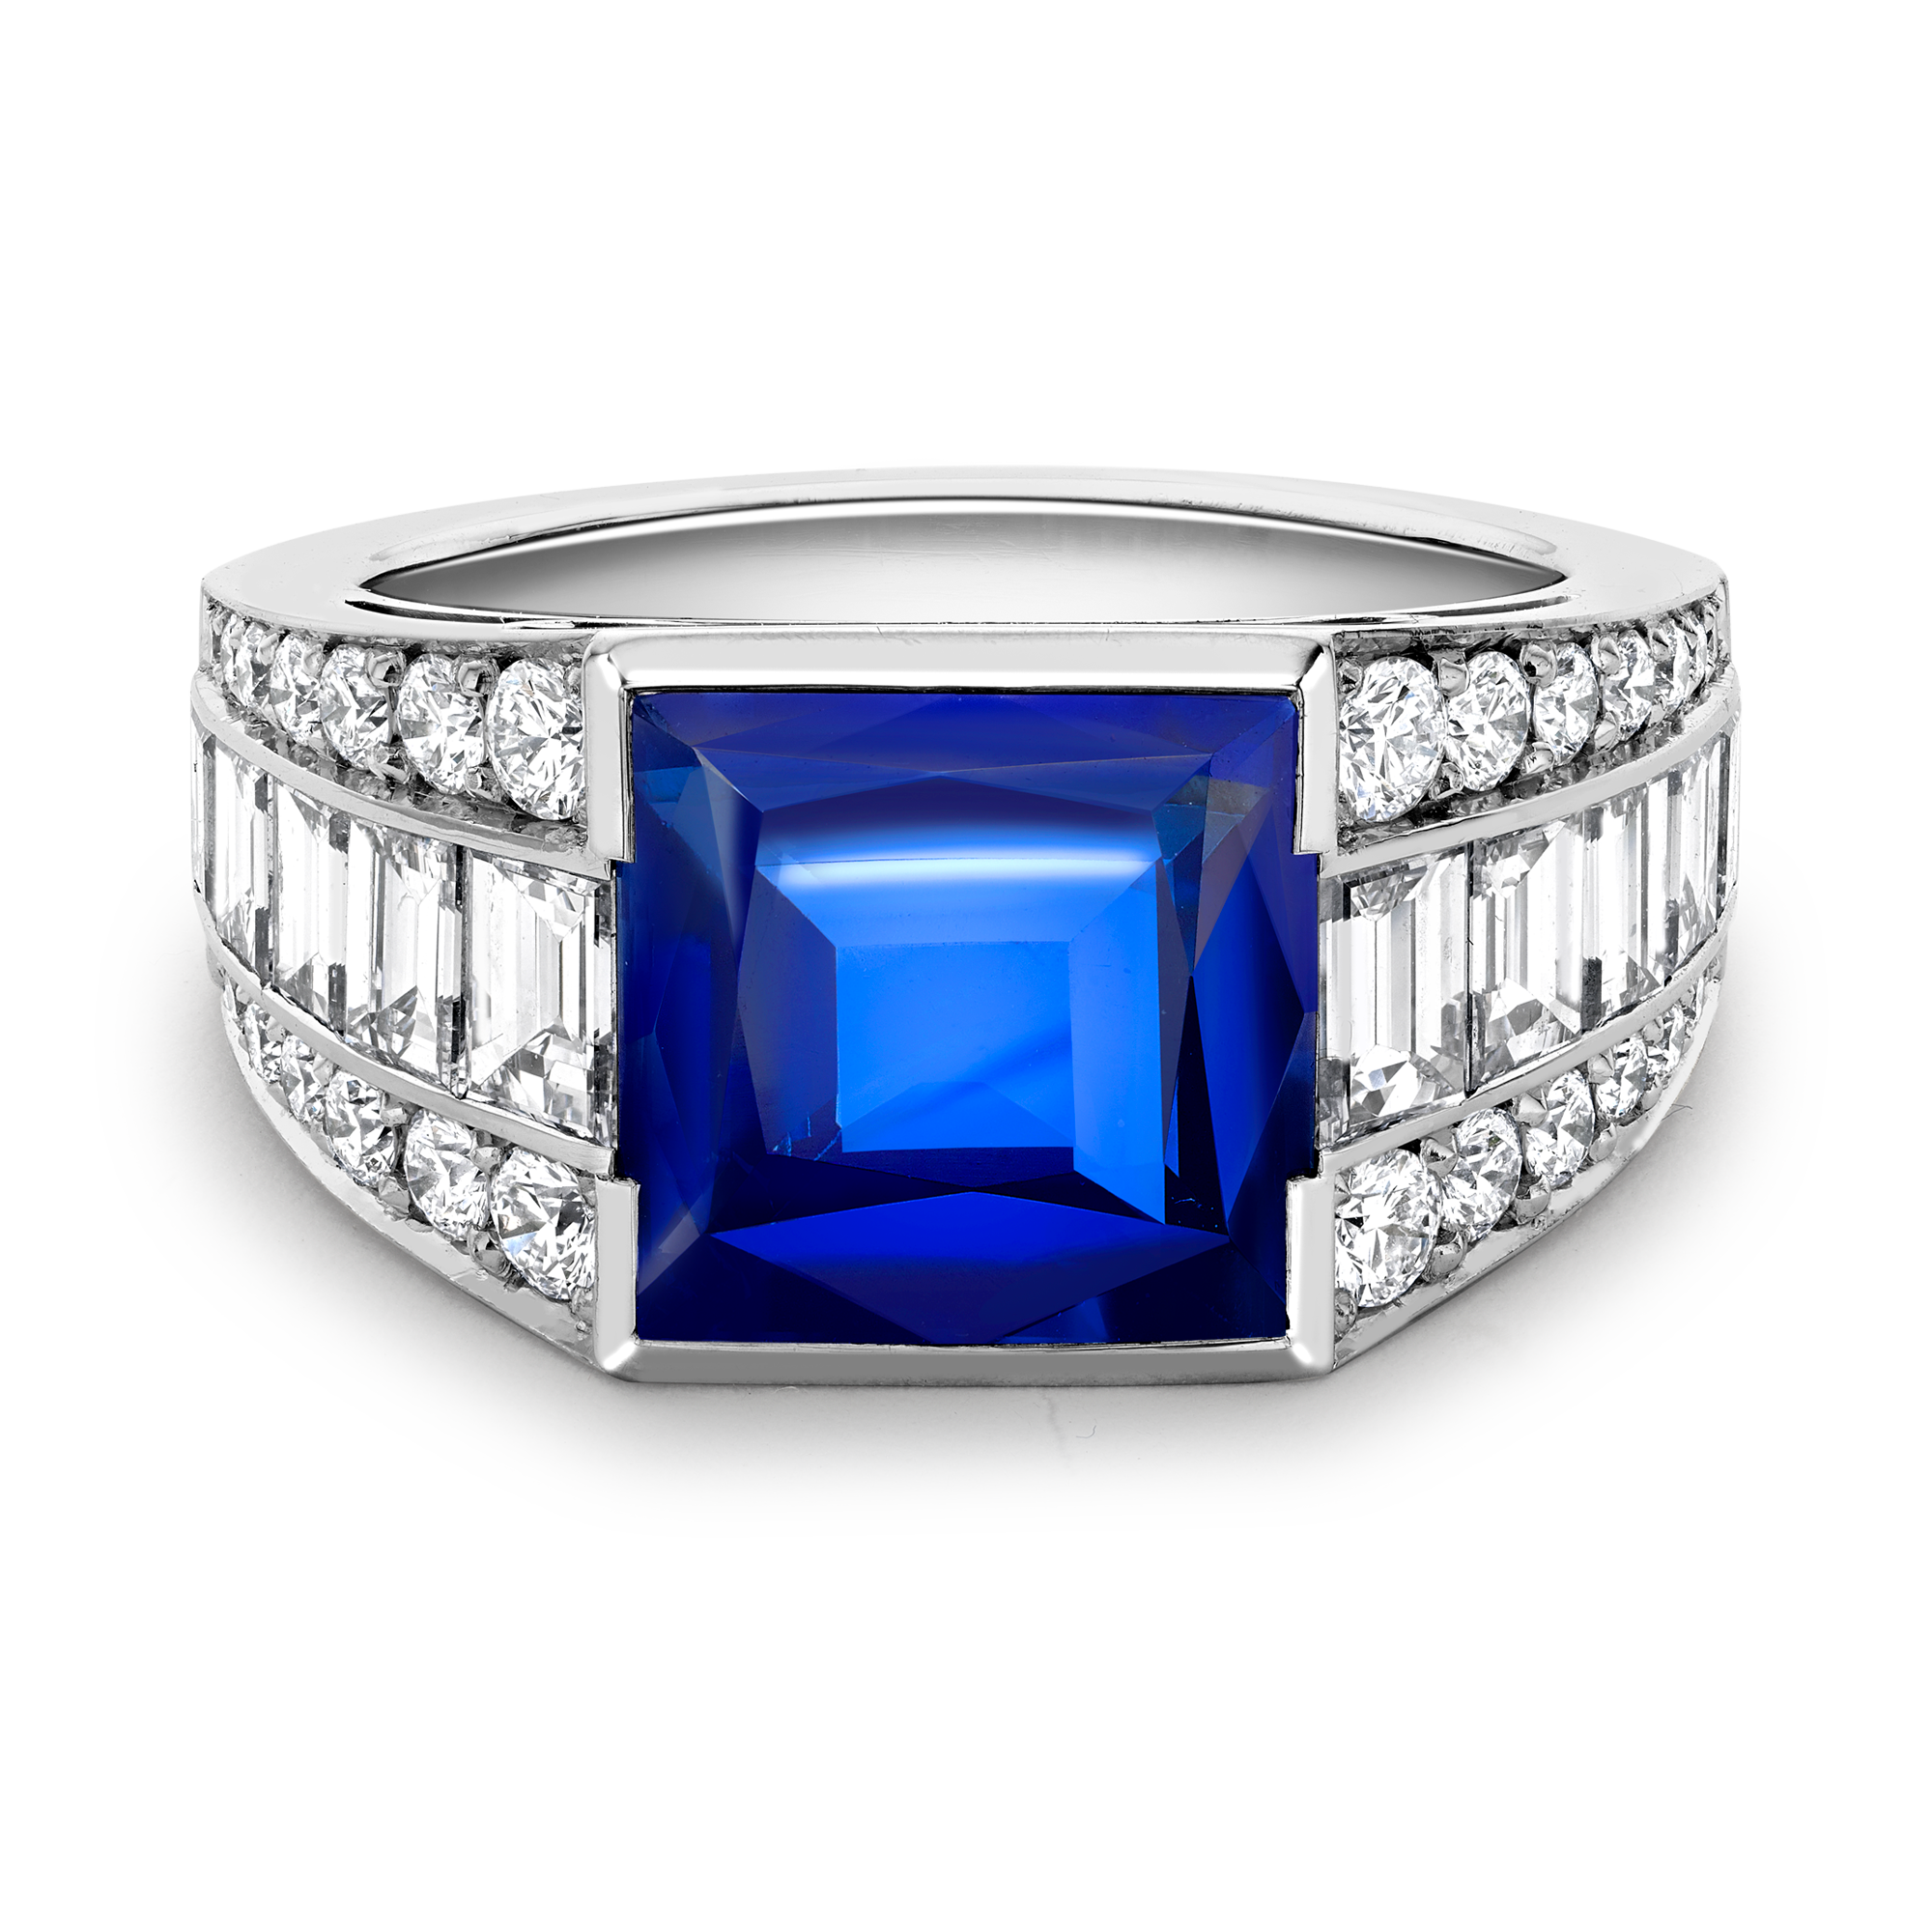 Masterpiece 4.21ct Kashmir Sapphire and Diamond Ring Square Cut, Rubover Set_2